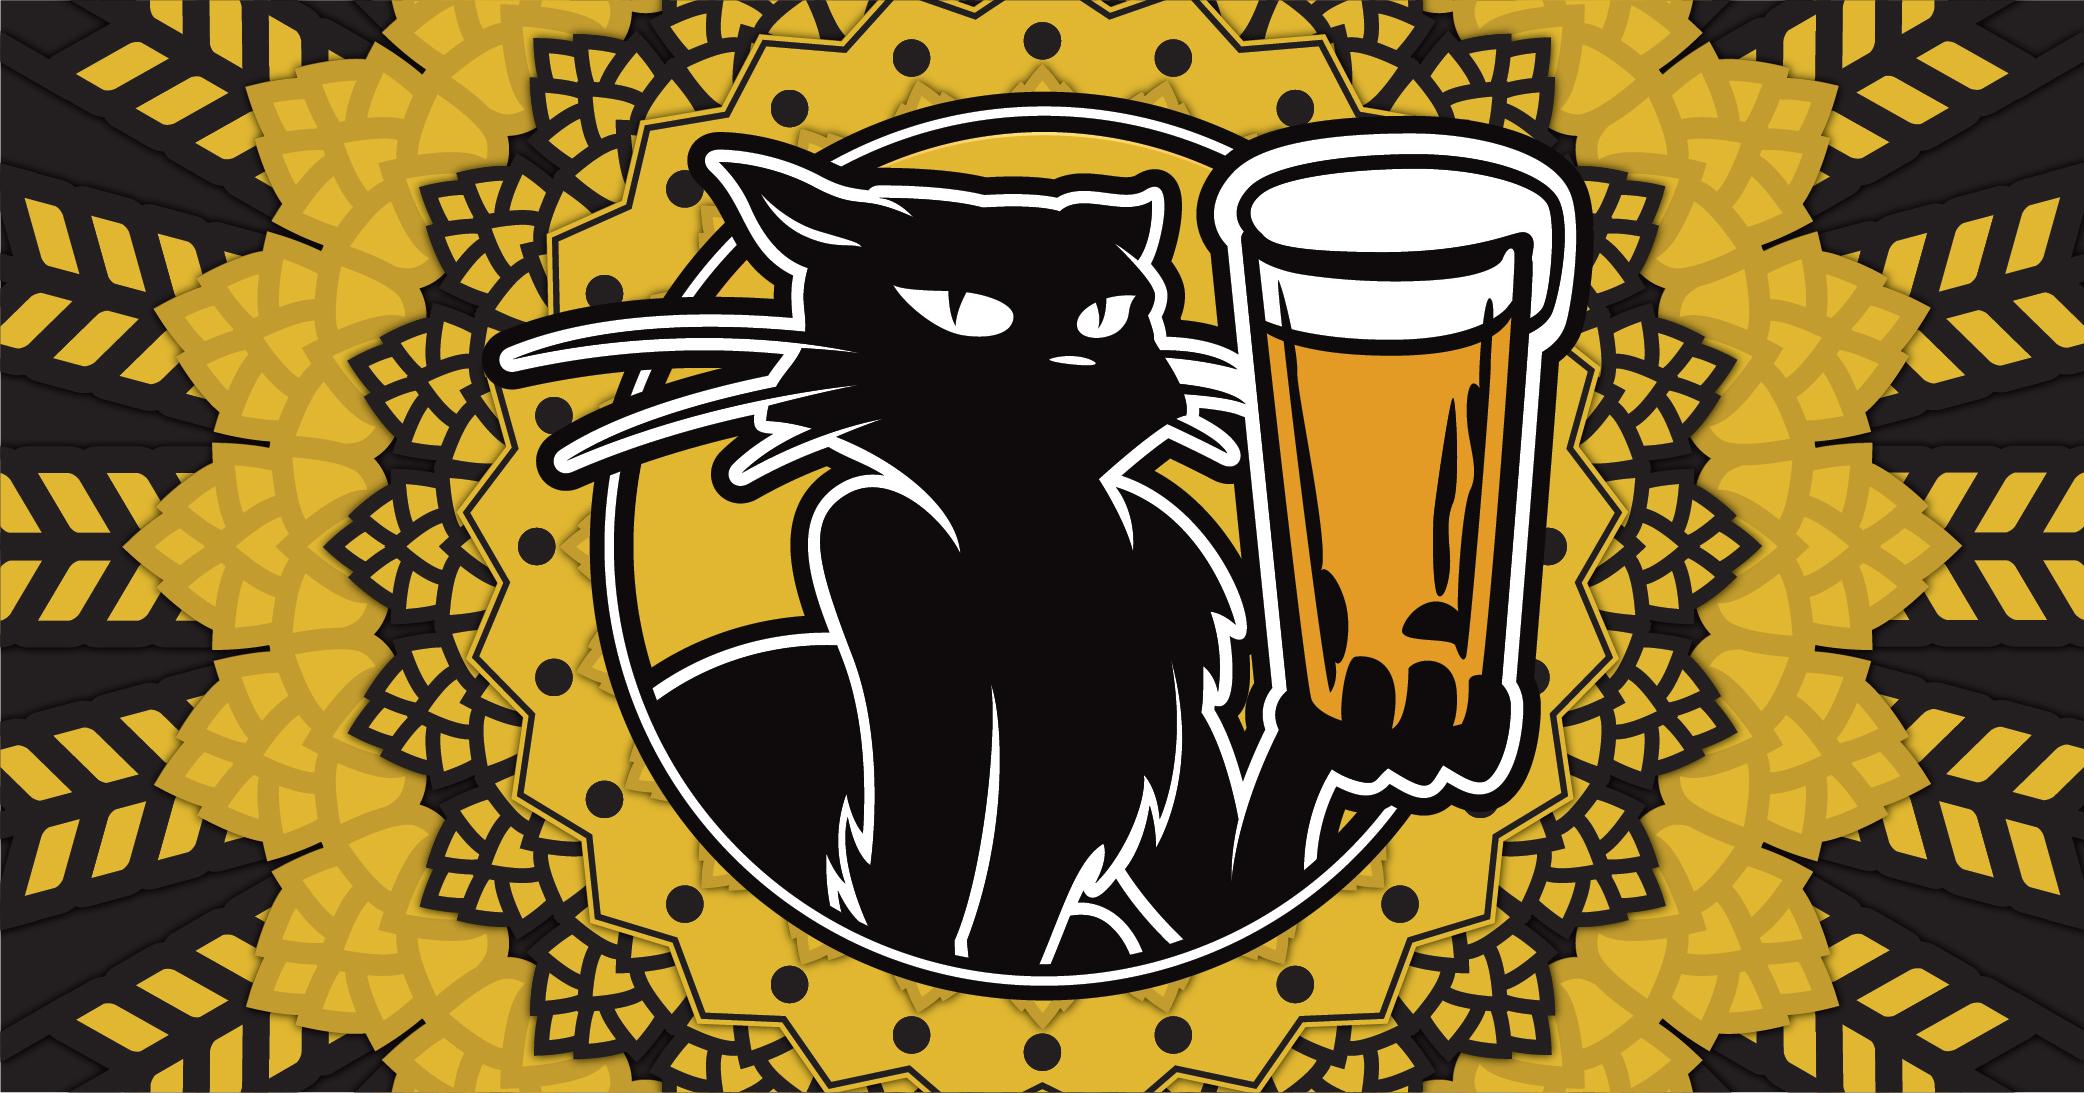 January Beer Dinner at HopCat featuring Fair State Brewing Co-Op